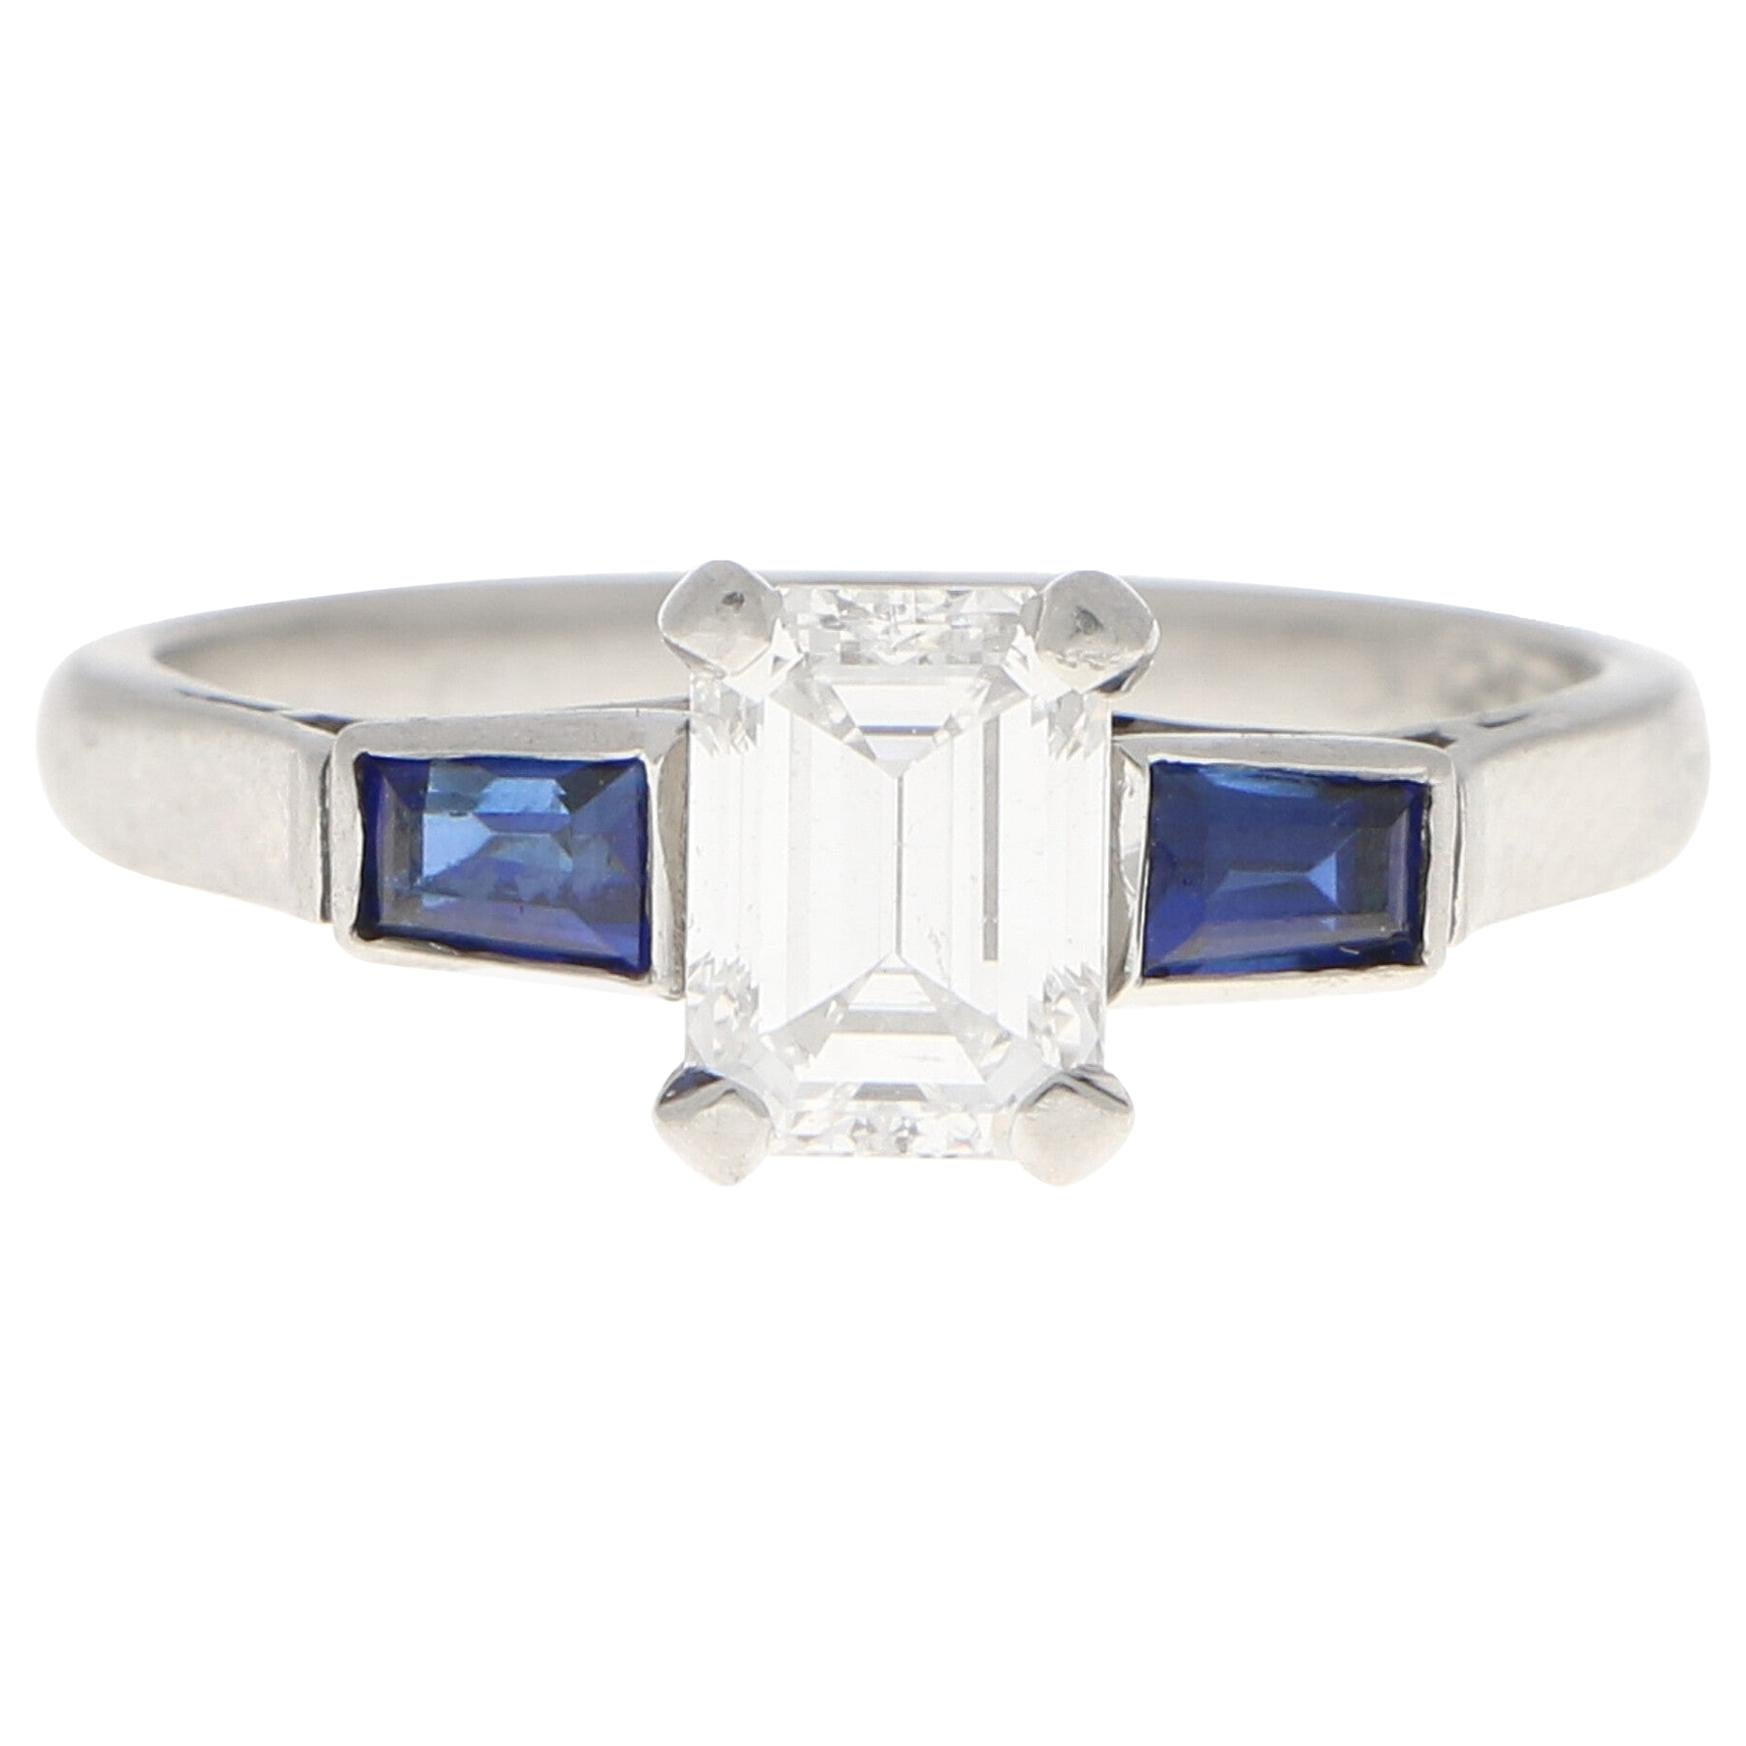 GIA Certified Art Deco Diamond and Sapphire Engagement Ring Set in Platinum